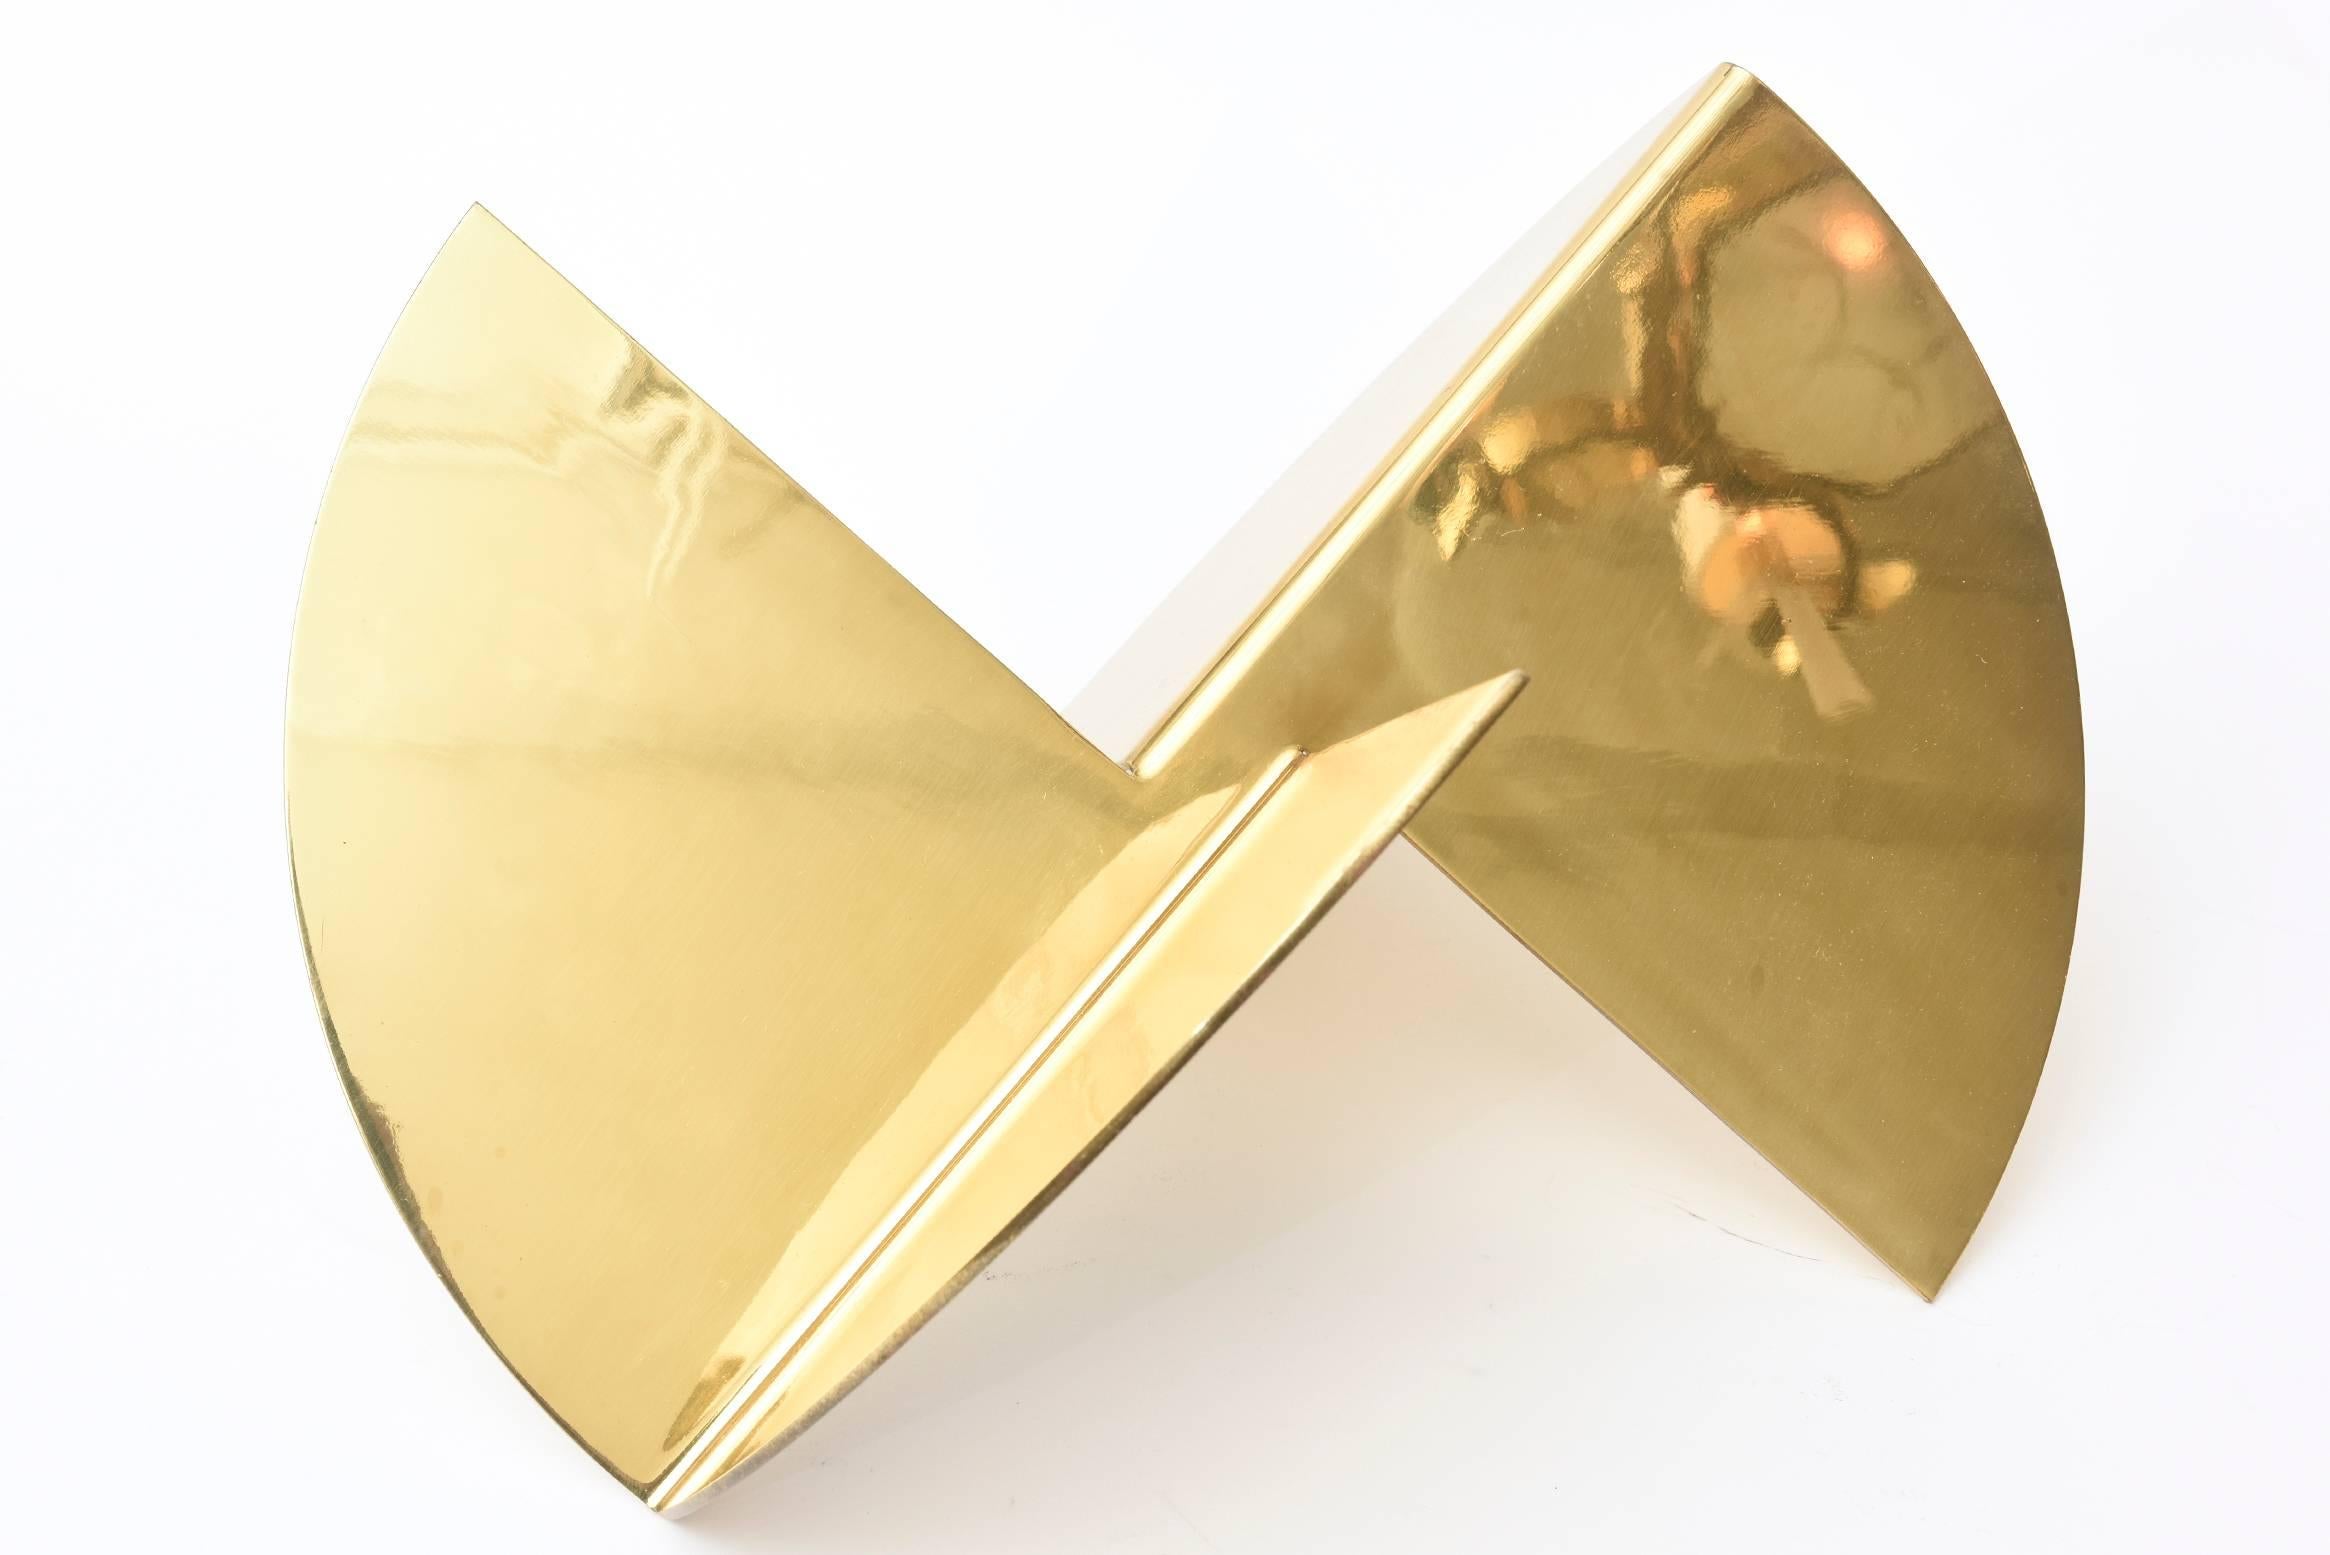 This wonderful gold-plated abstract geometric modern sculpture is almost like a work in origami of four intersecting planes of simple forms. It is a great tabletop sculpture that with each angle represents a new viewpoint and abstraction.
It has